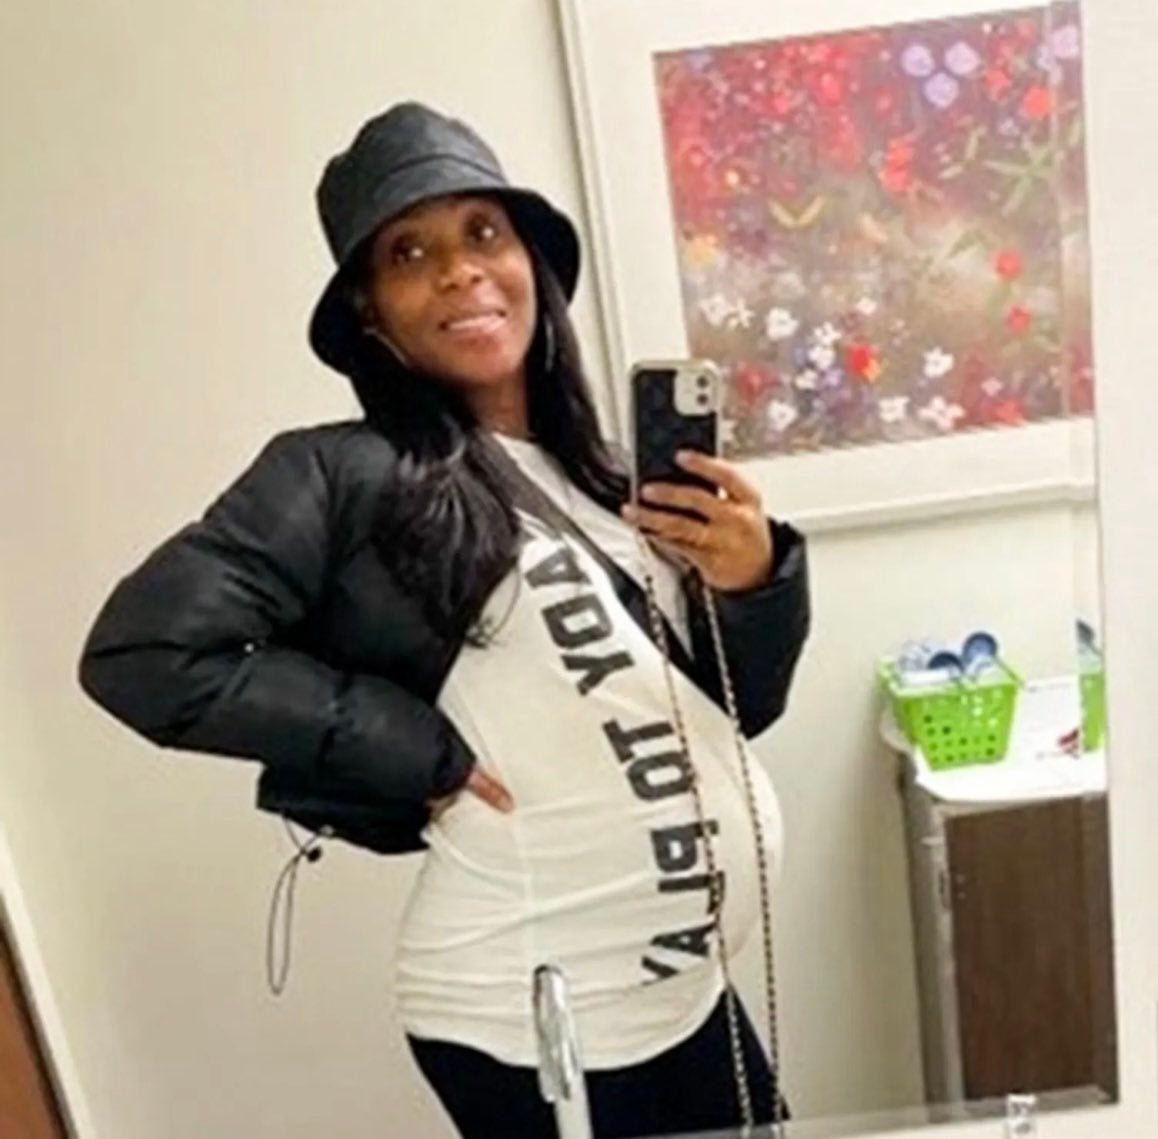 Black Mom Wrongfully Arrested While 8 Months Pregnant Due To Faulty Facial Recognition